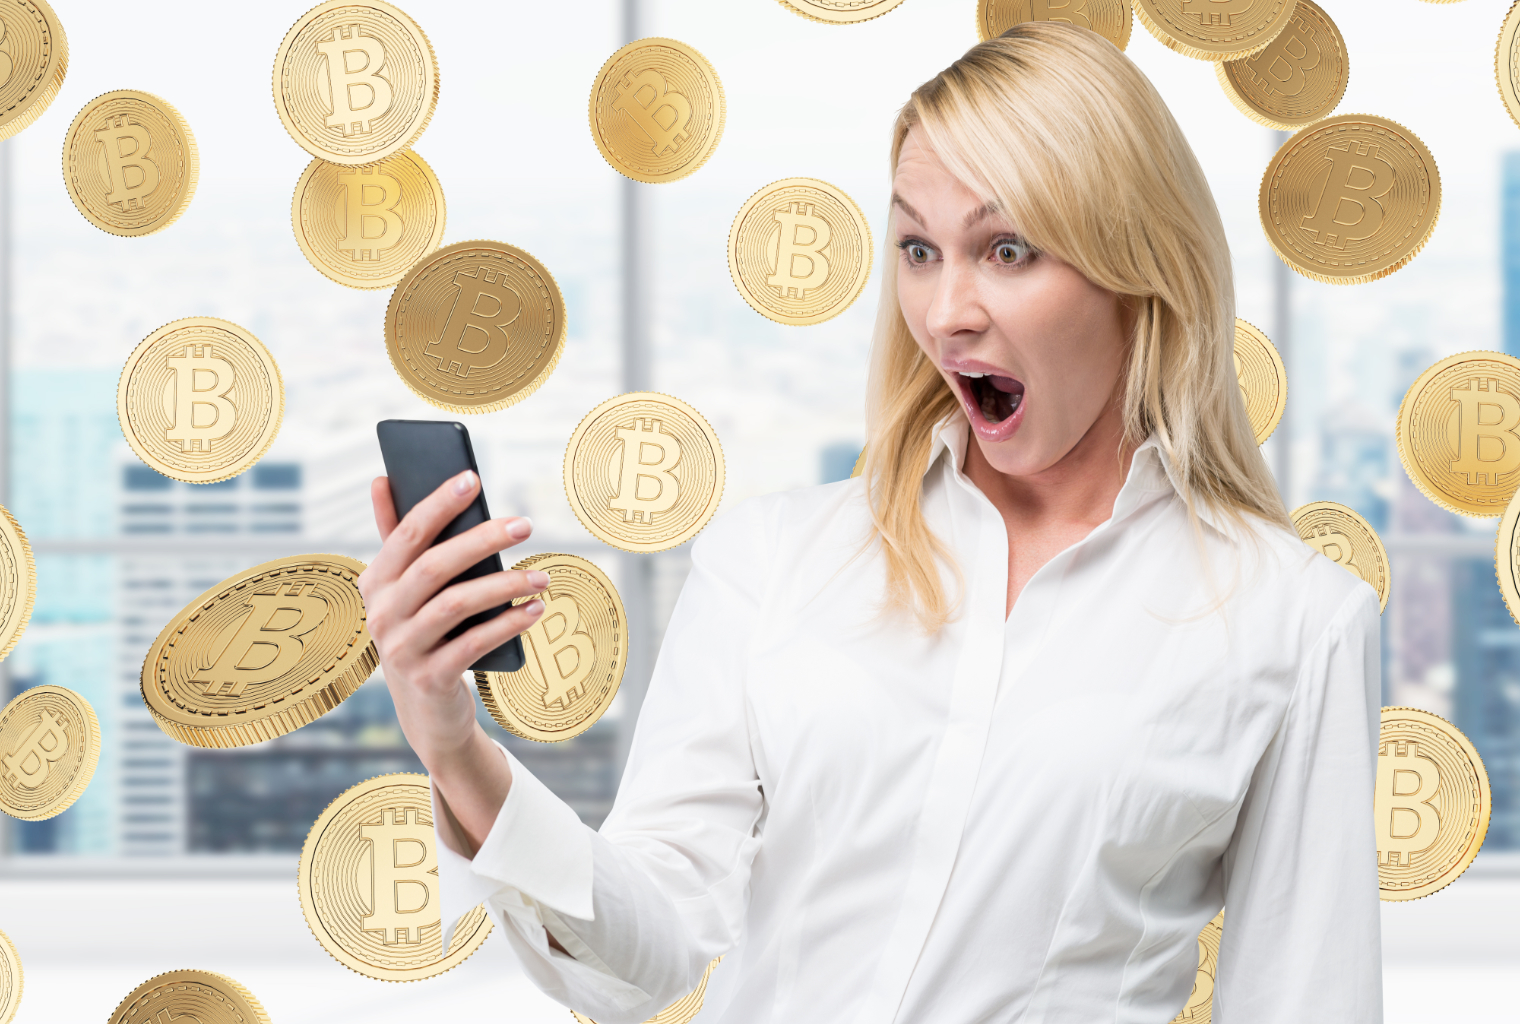 Bitcoin Revolution: Wanna Earn $1,000 a Day? Government Warns About This Scam